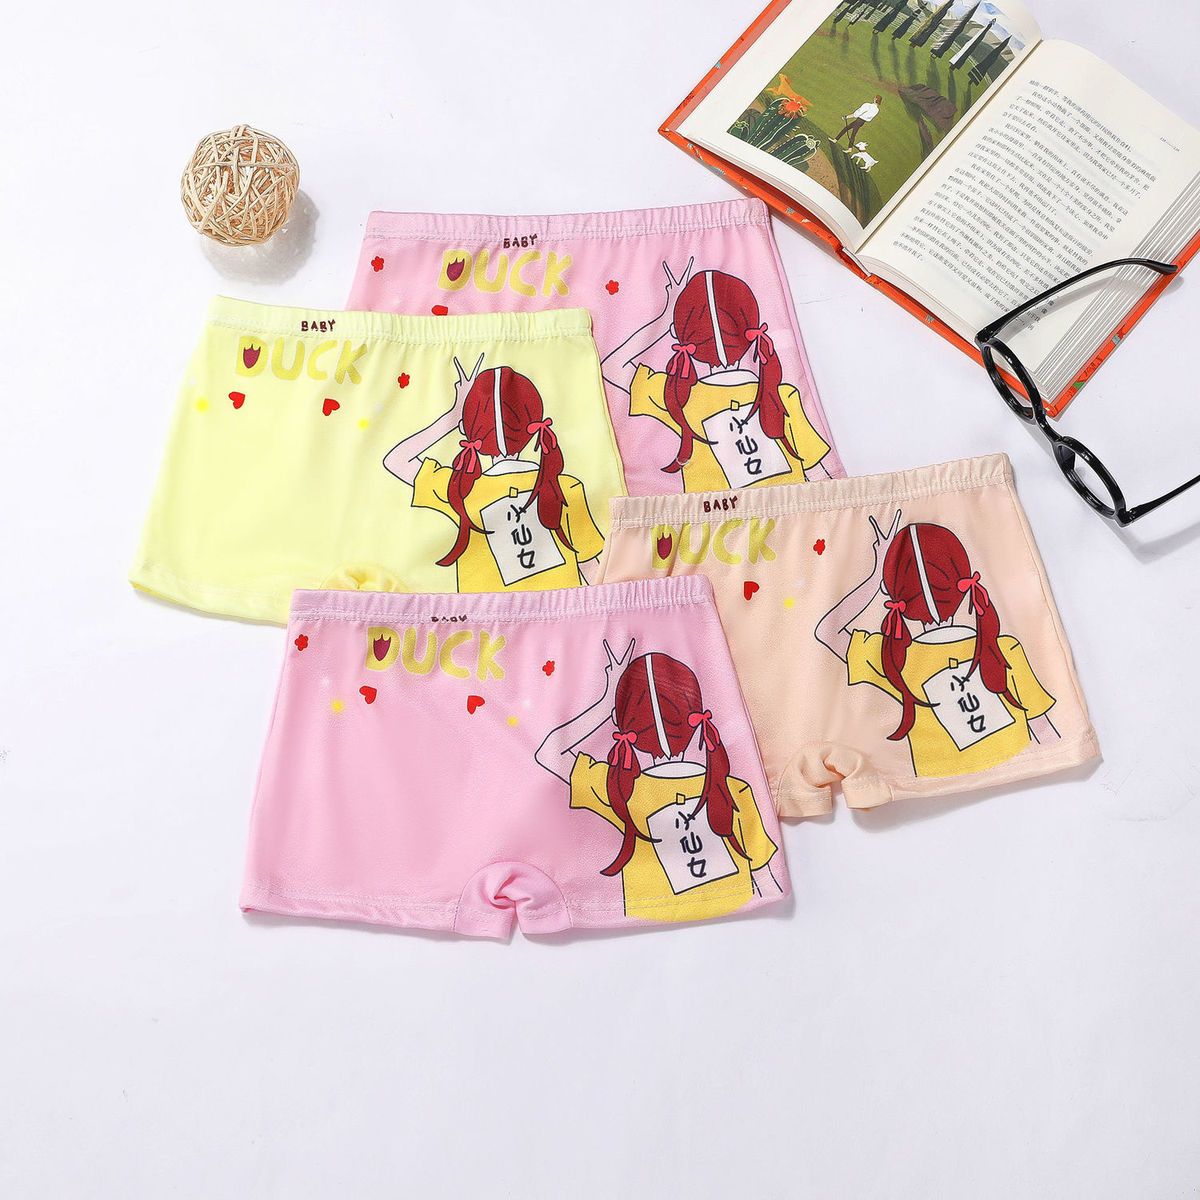 4 packs of girls' shorts cartoon boxer safety pants baby children's small, medium and big boys and girls pink boxer underwear